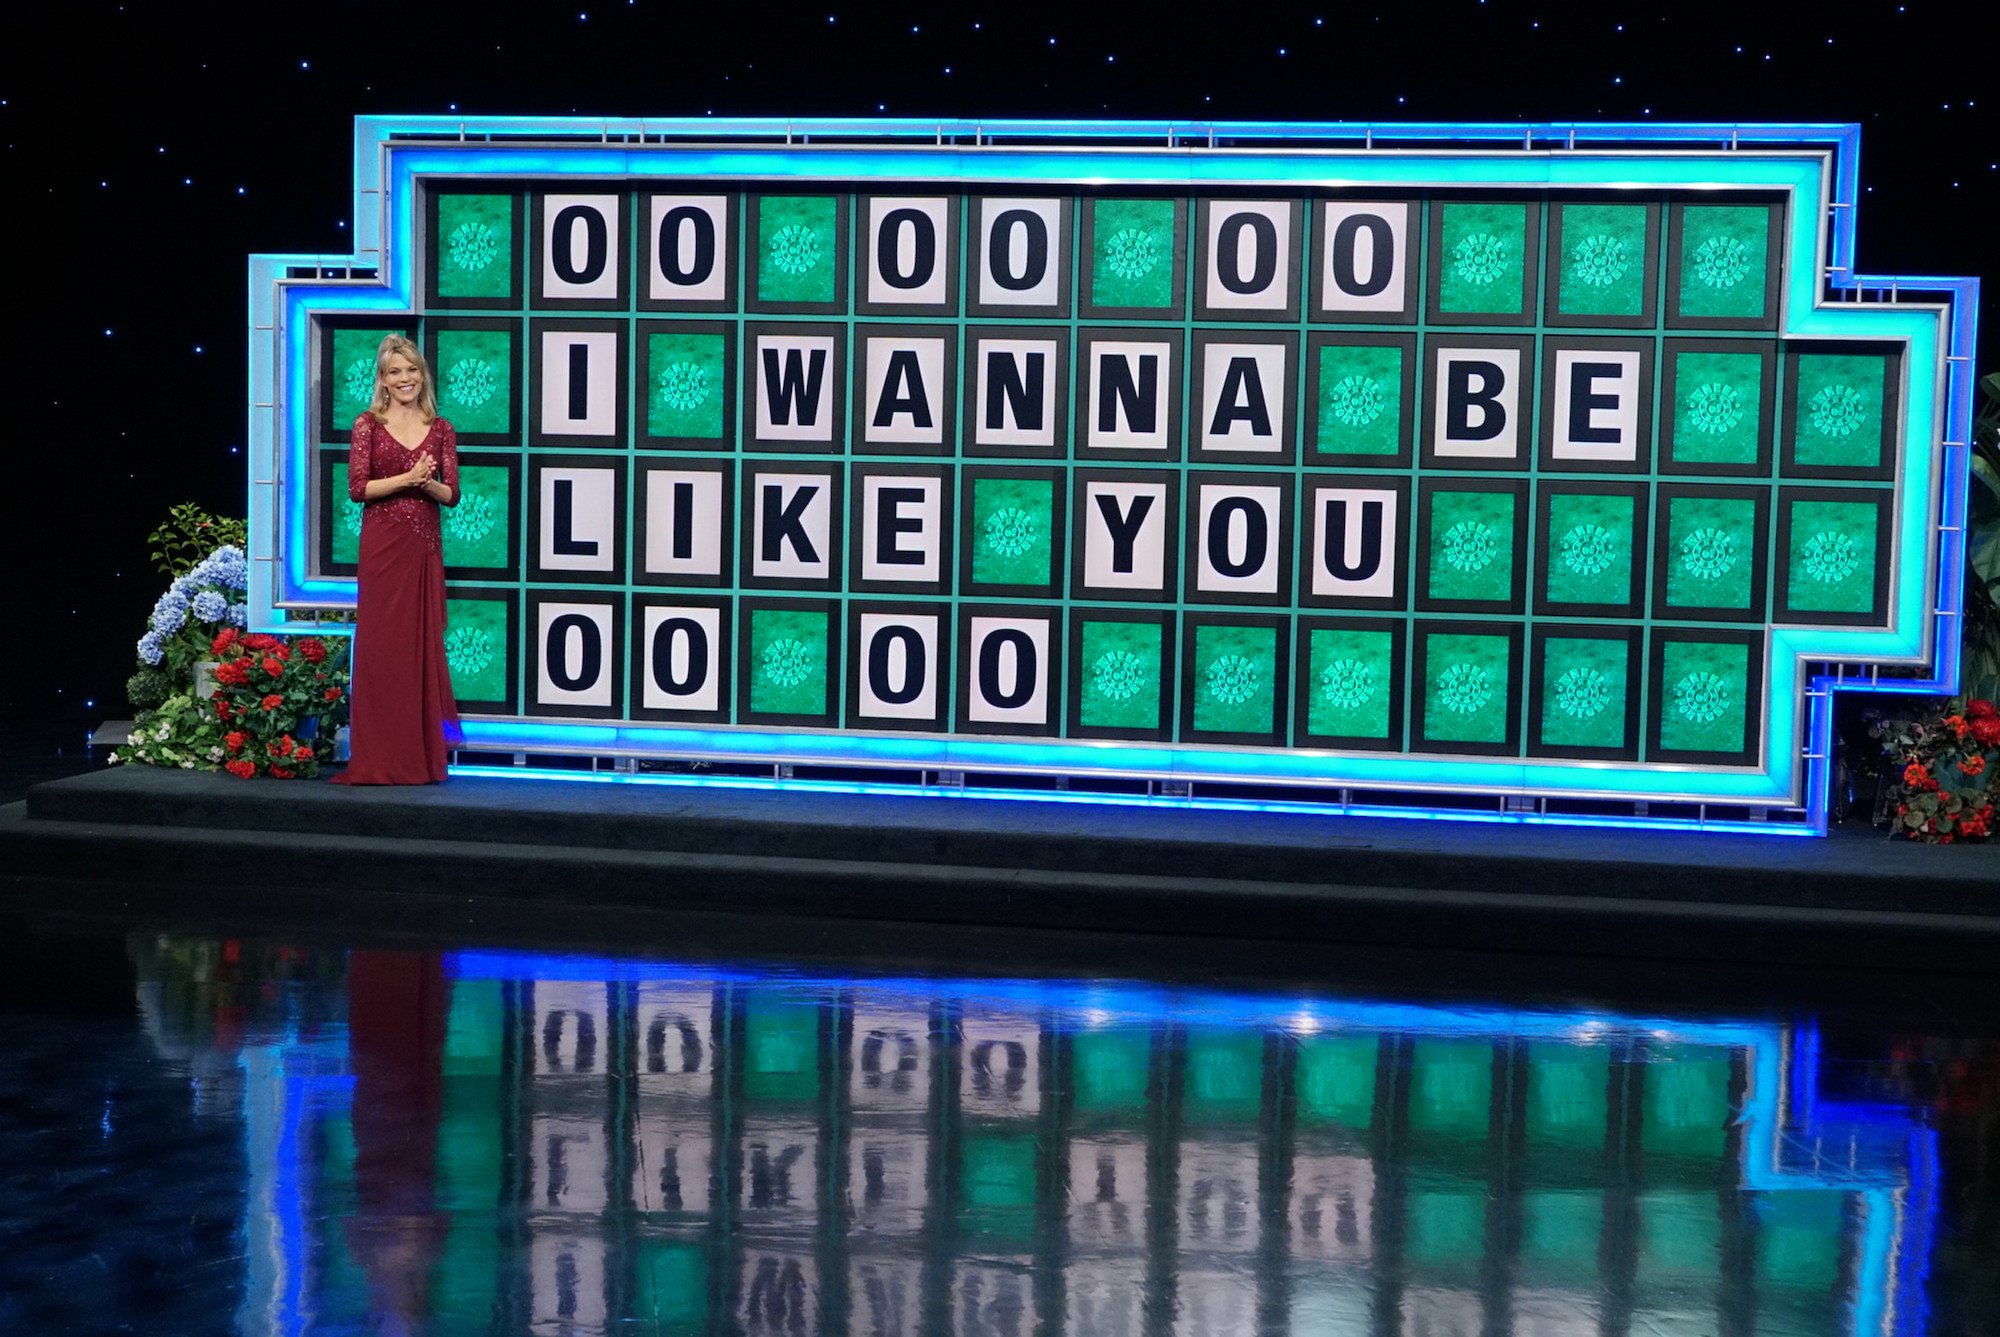 Vanna White smiling next to the Wheel of Fortune letterboard